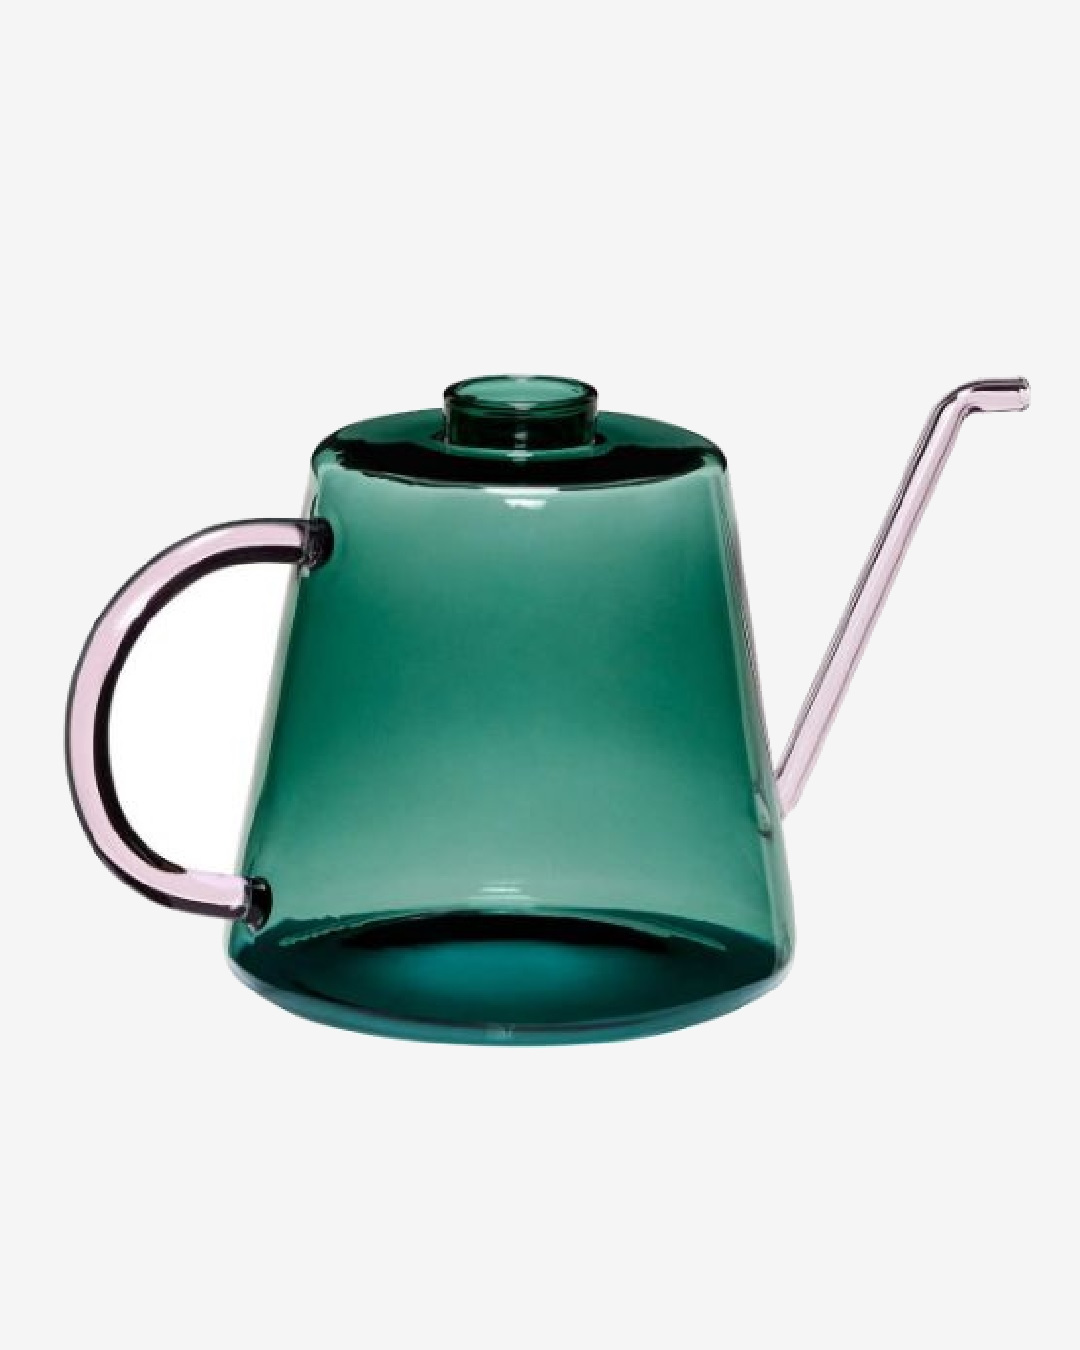 Green and clear glass teapot